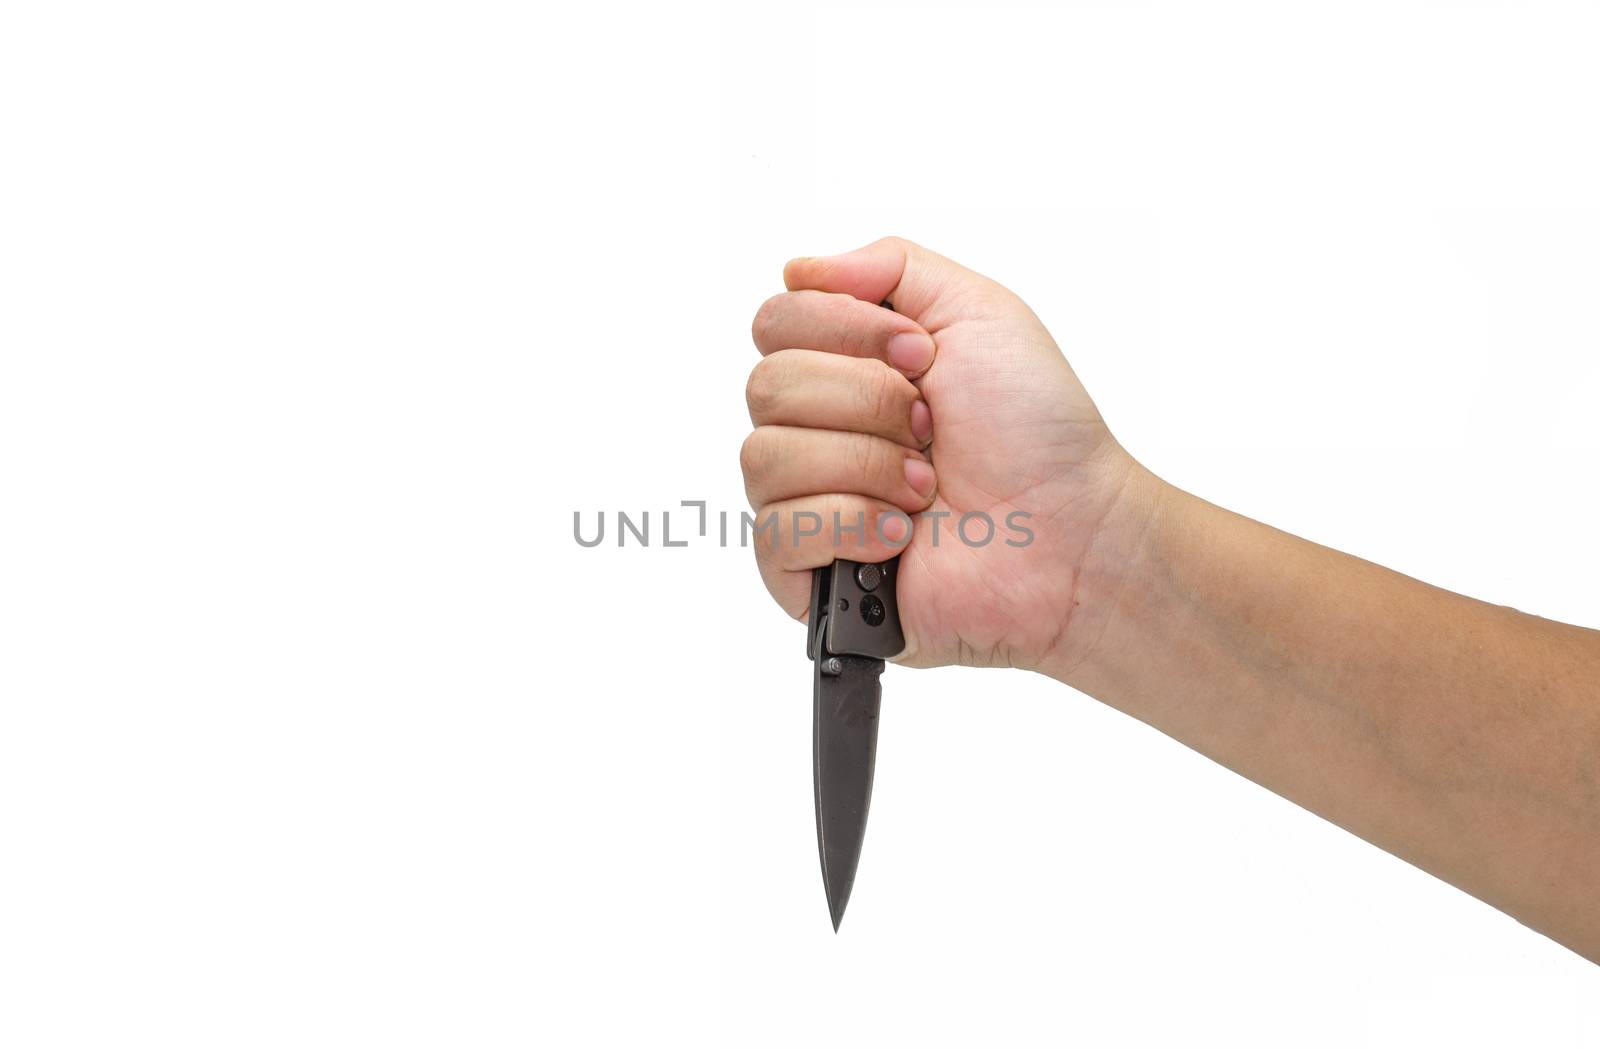 knife in hand on a white background by photobyphotoboy